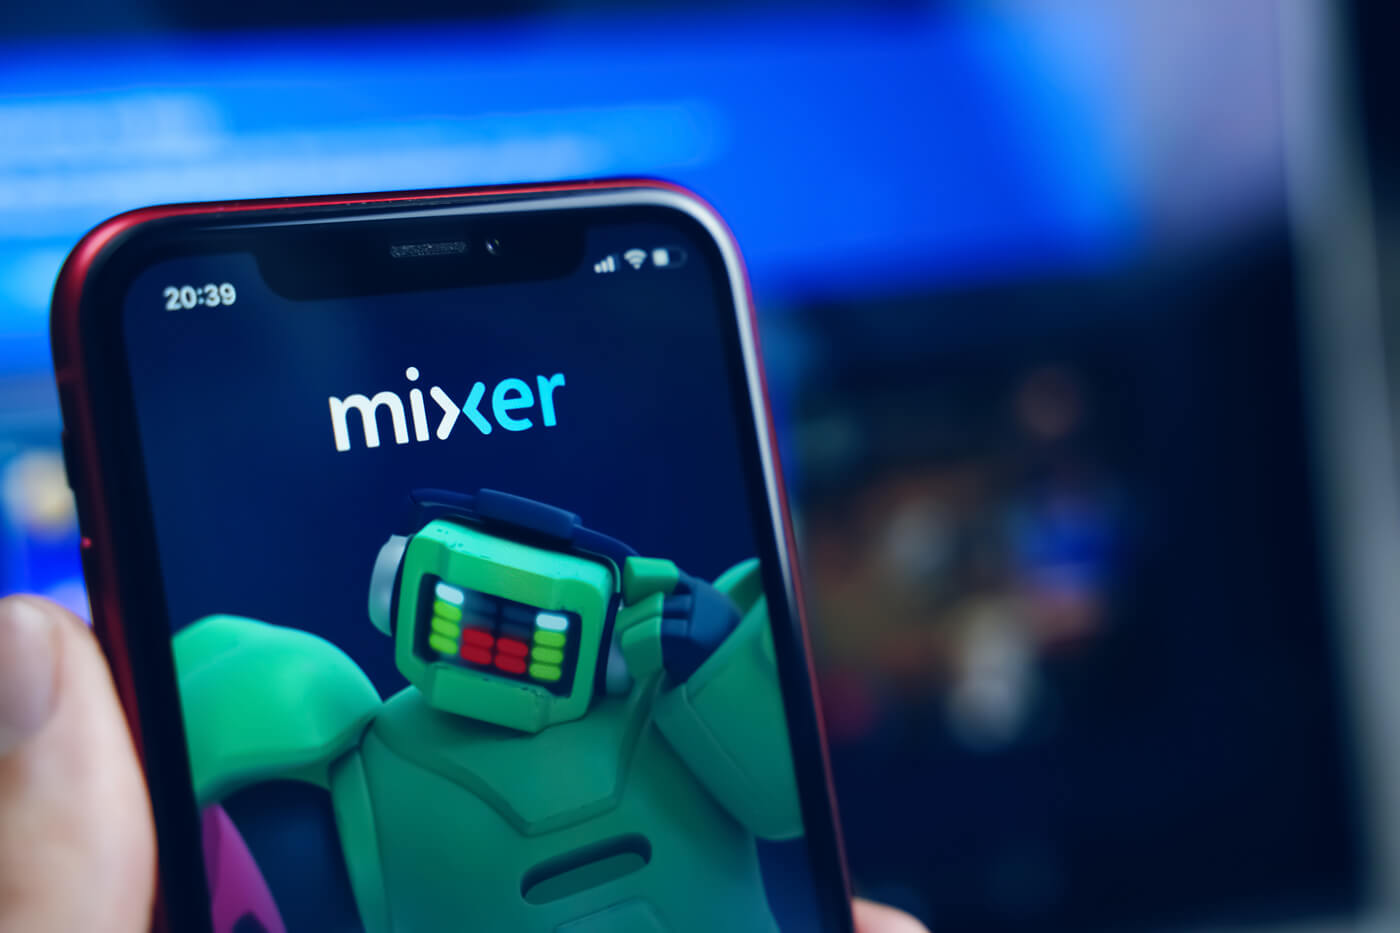 Microsoft's Mixer livestreaming service gifts every partner $100